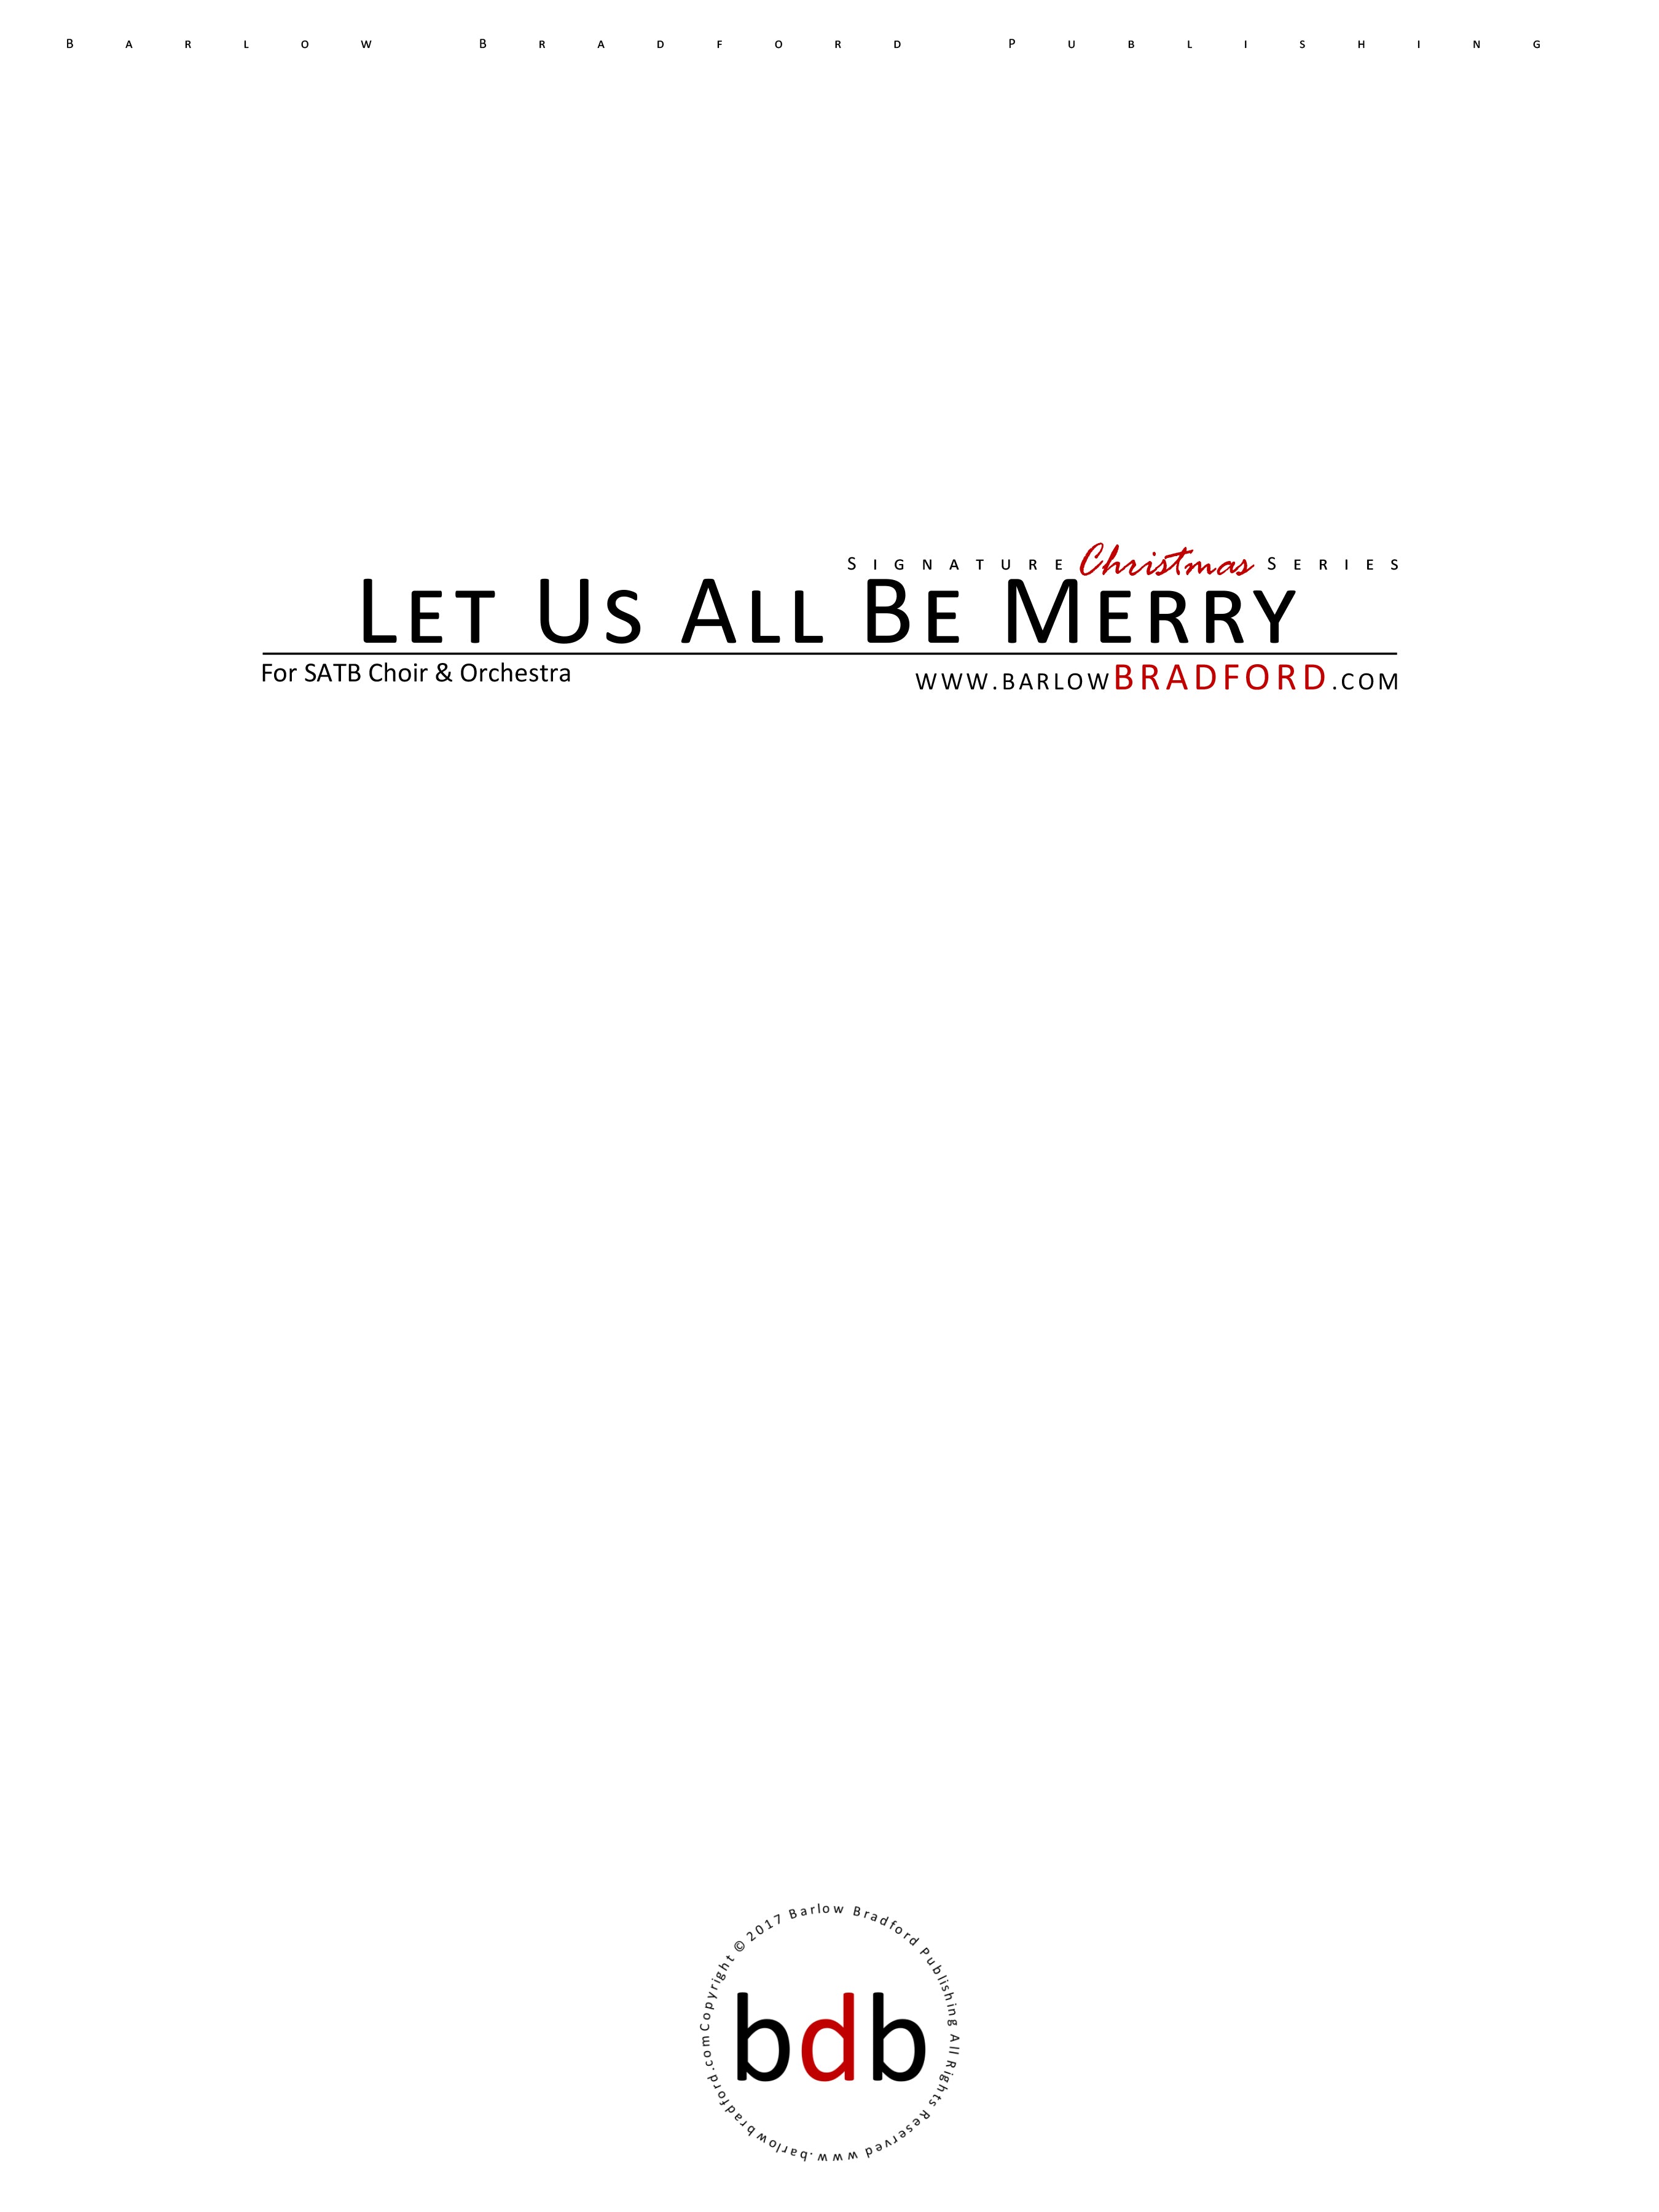 Let Us All Be Merry